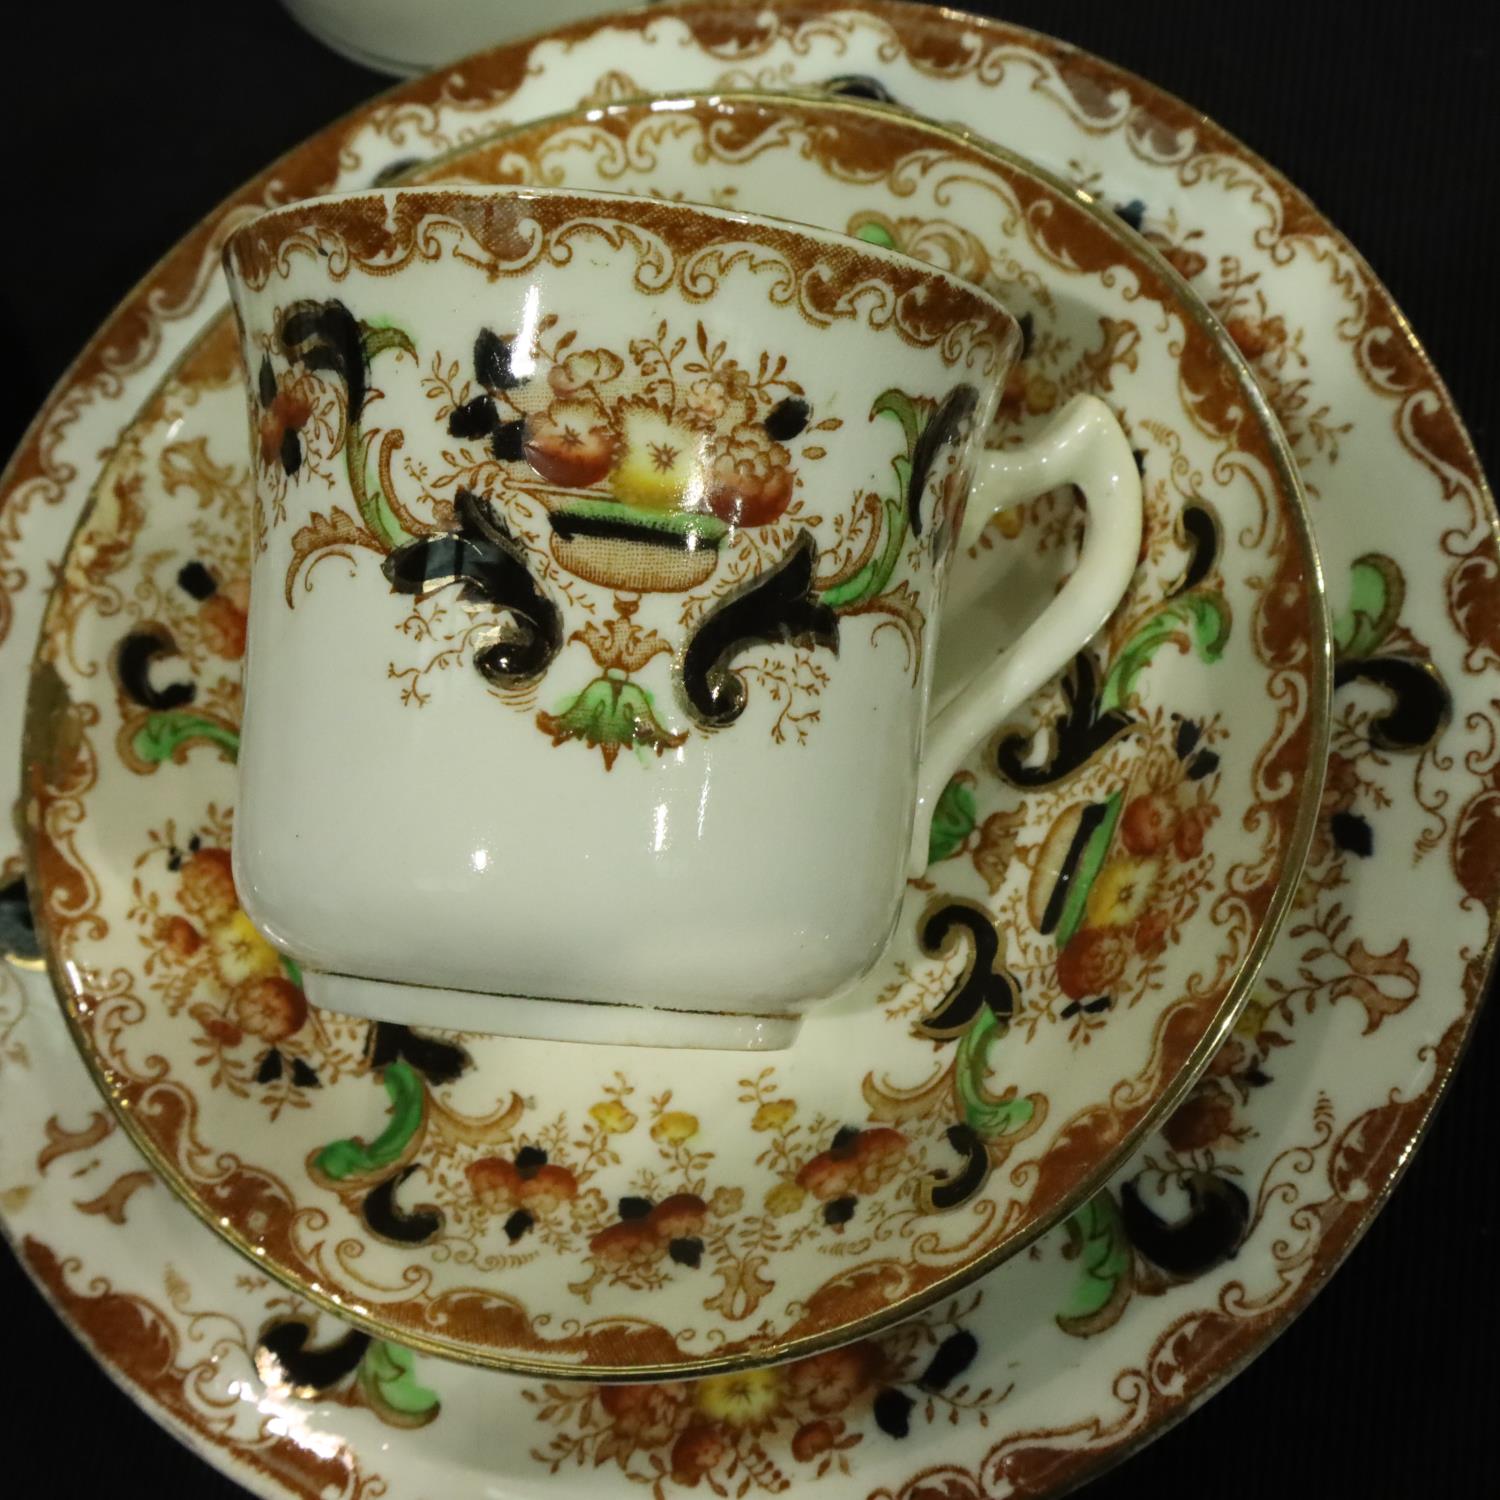 Edwardian tea service of thirty pieces with gilt and floral decoration, signs of use and wear - Image 2 of 3